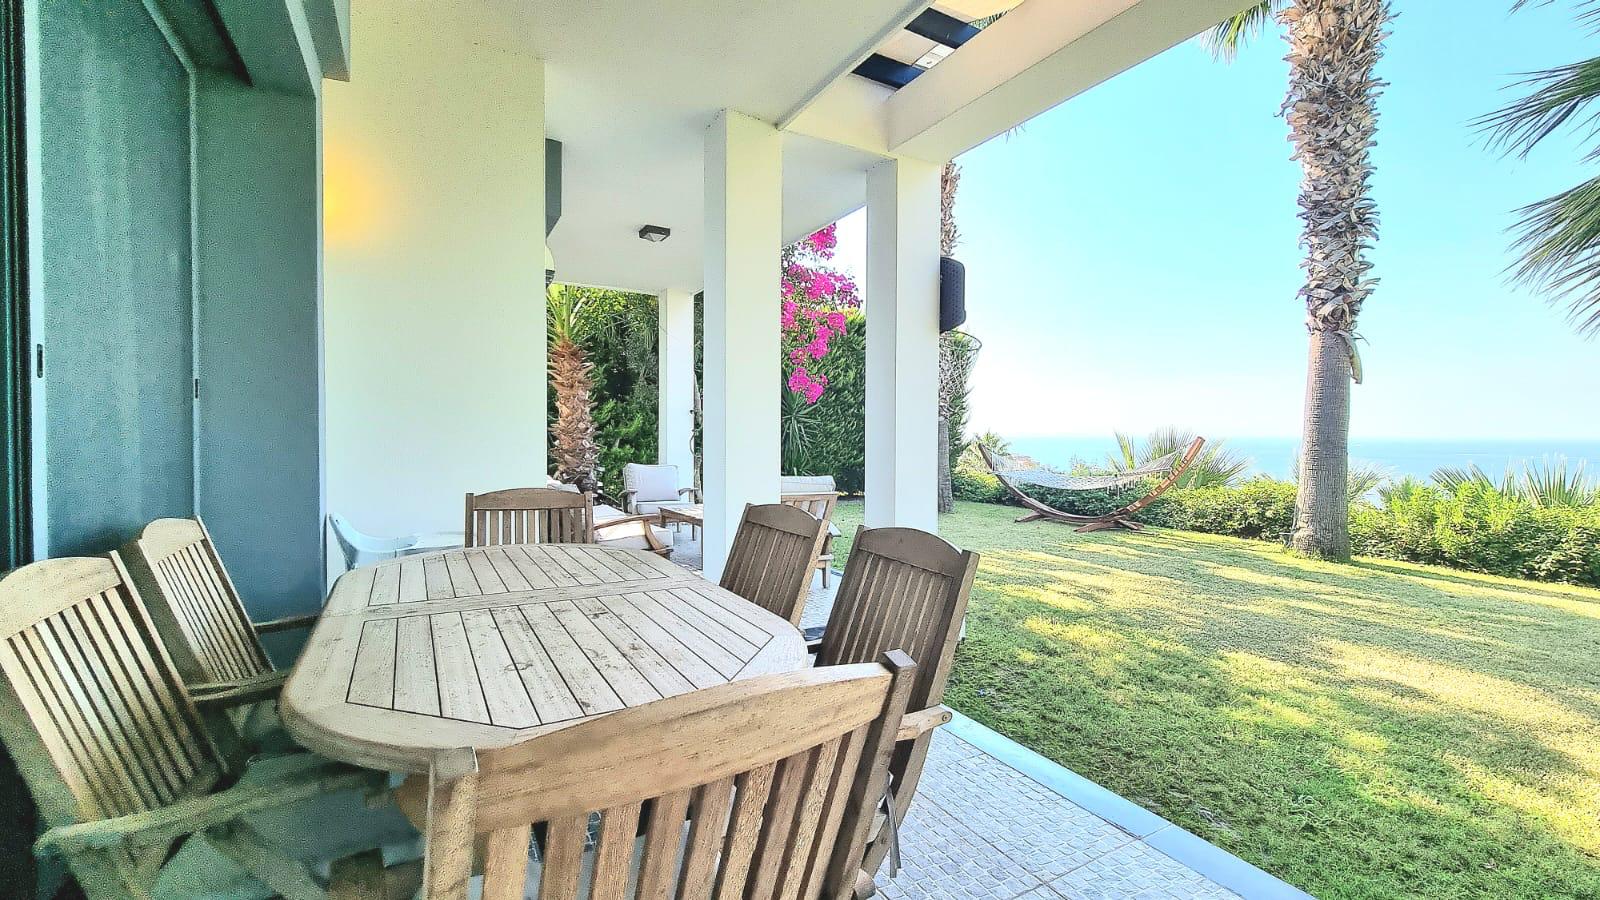 Villa with a sea view in Bodrum/Yalıkavak on sale